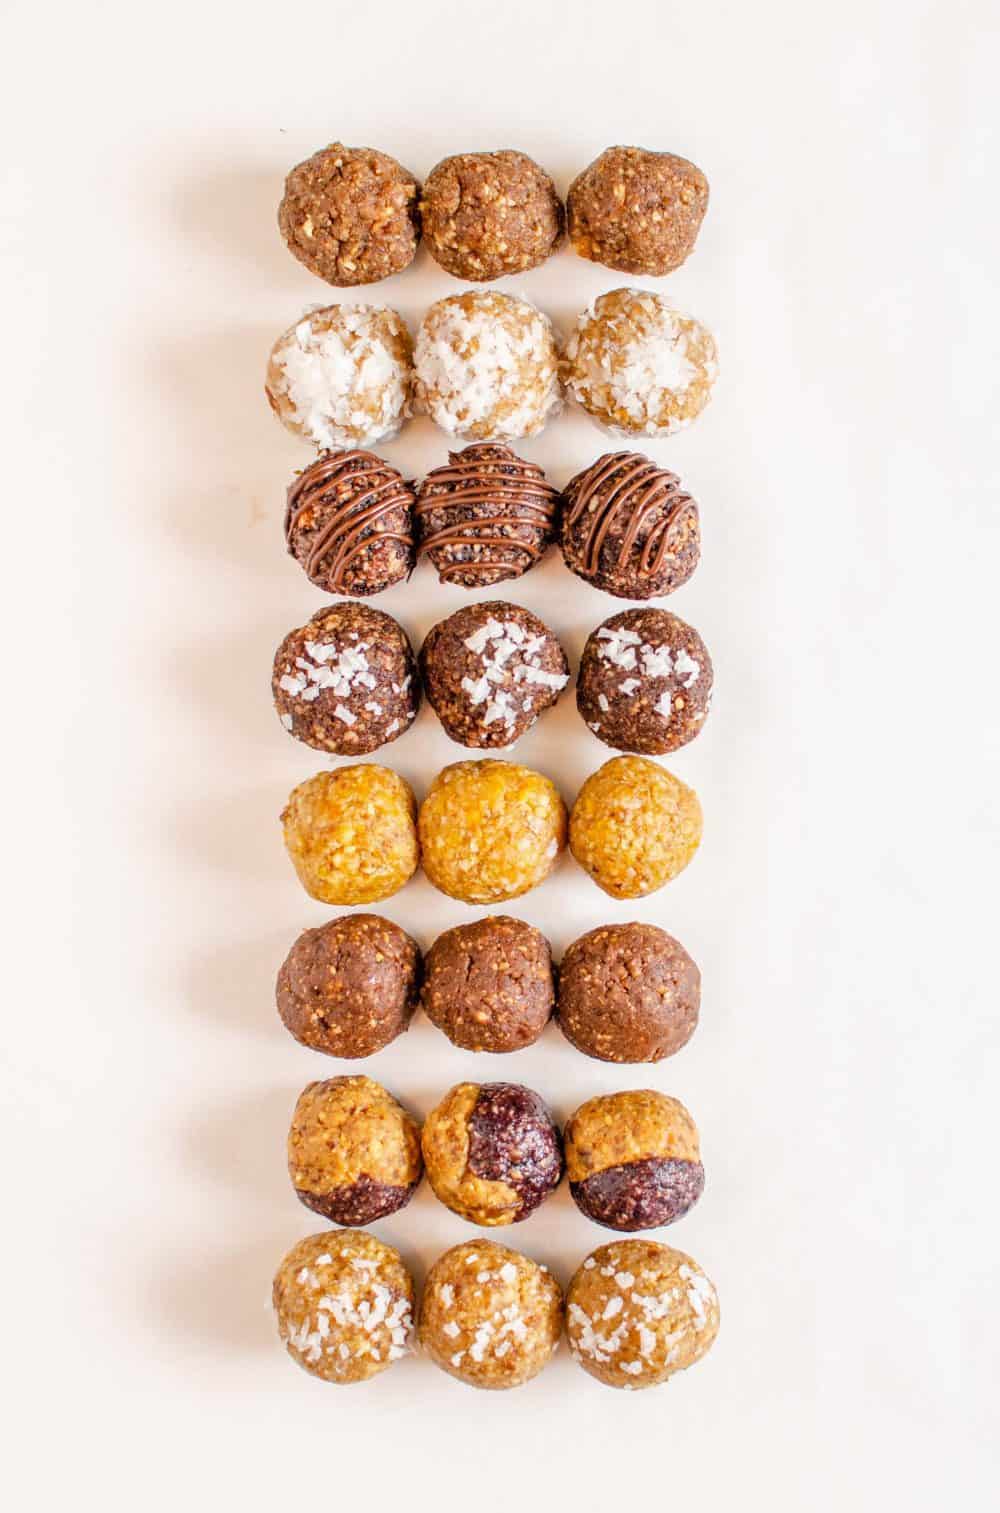 Rows of different types of date energy bites